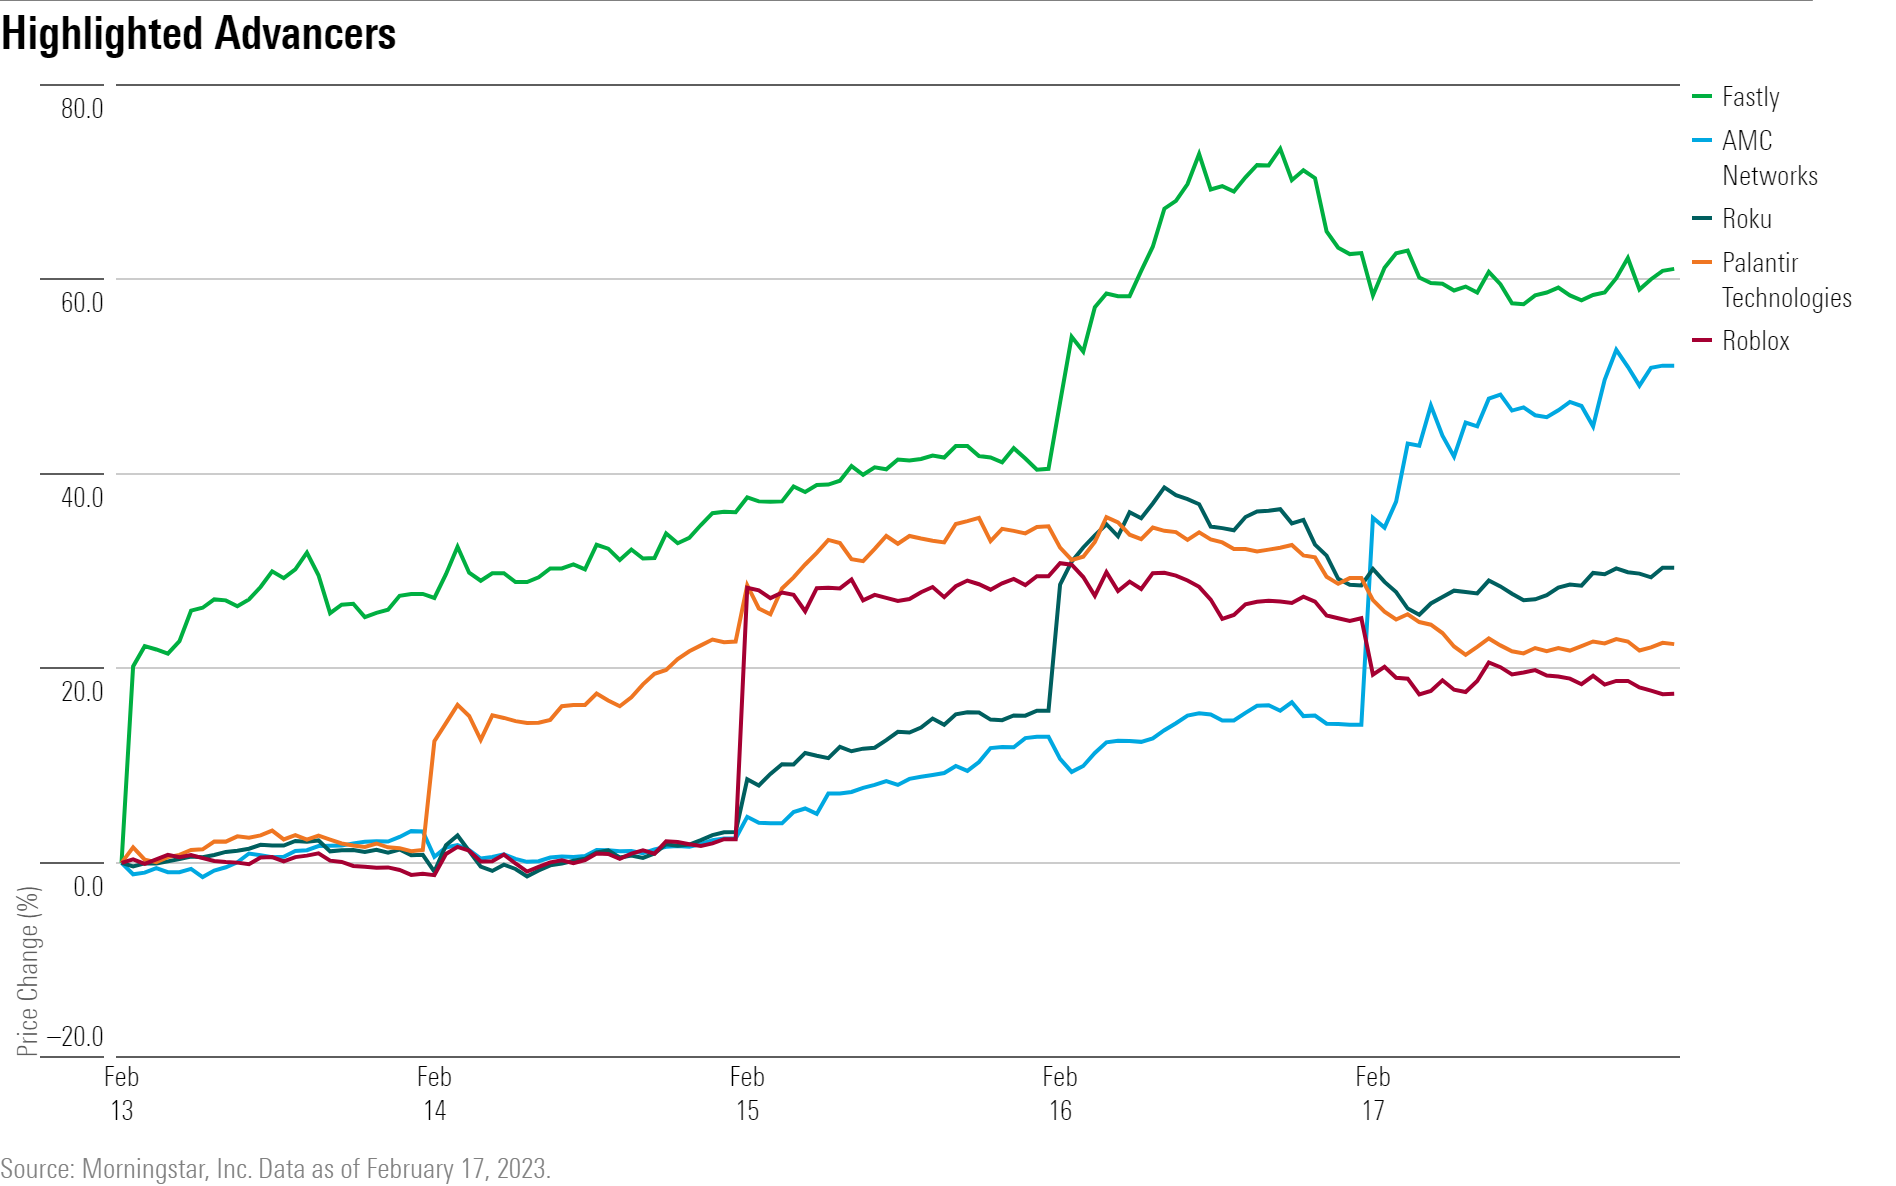 A line chart showing the performance of FSLY, AMCX, ROKU, PLTR, and RBLX stock.